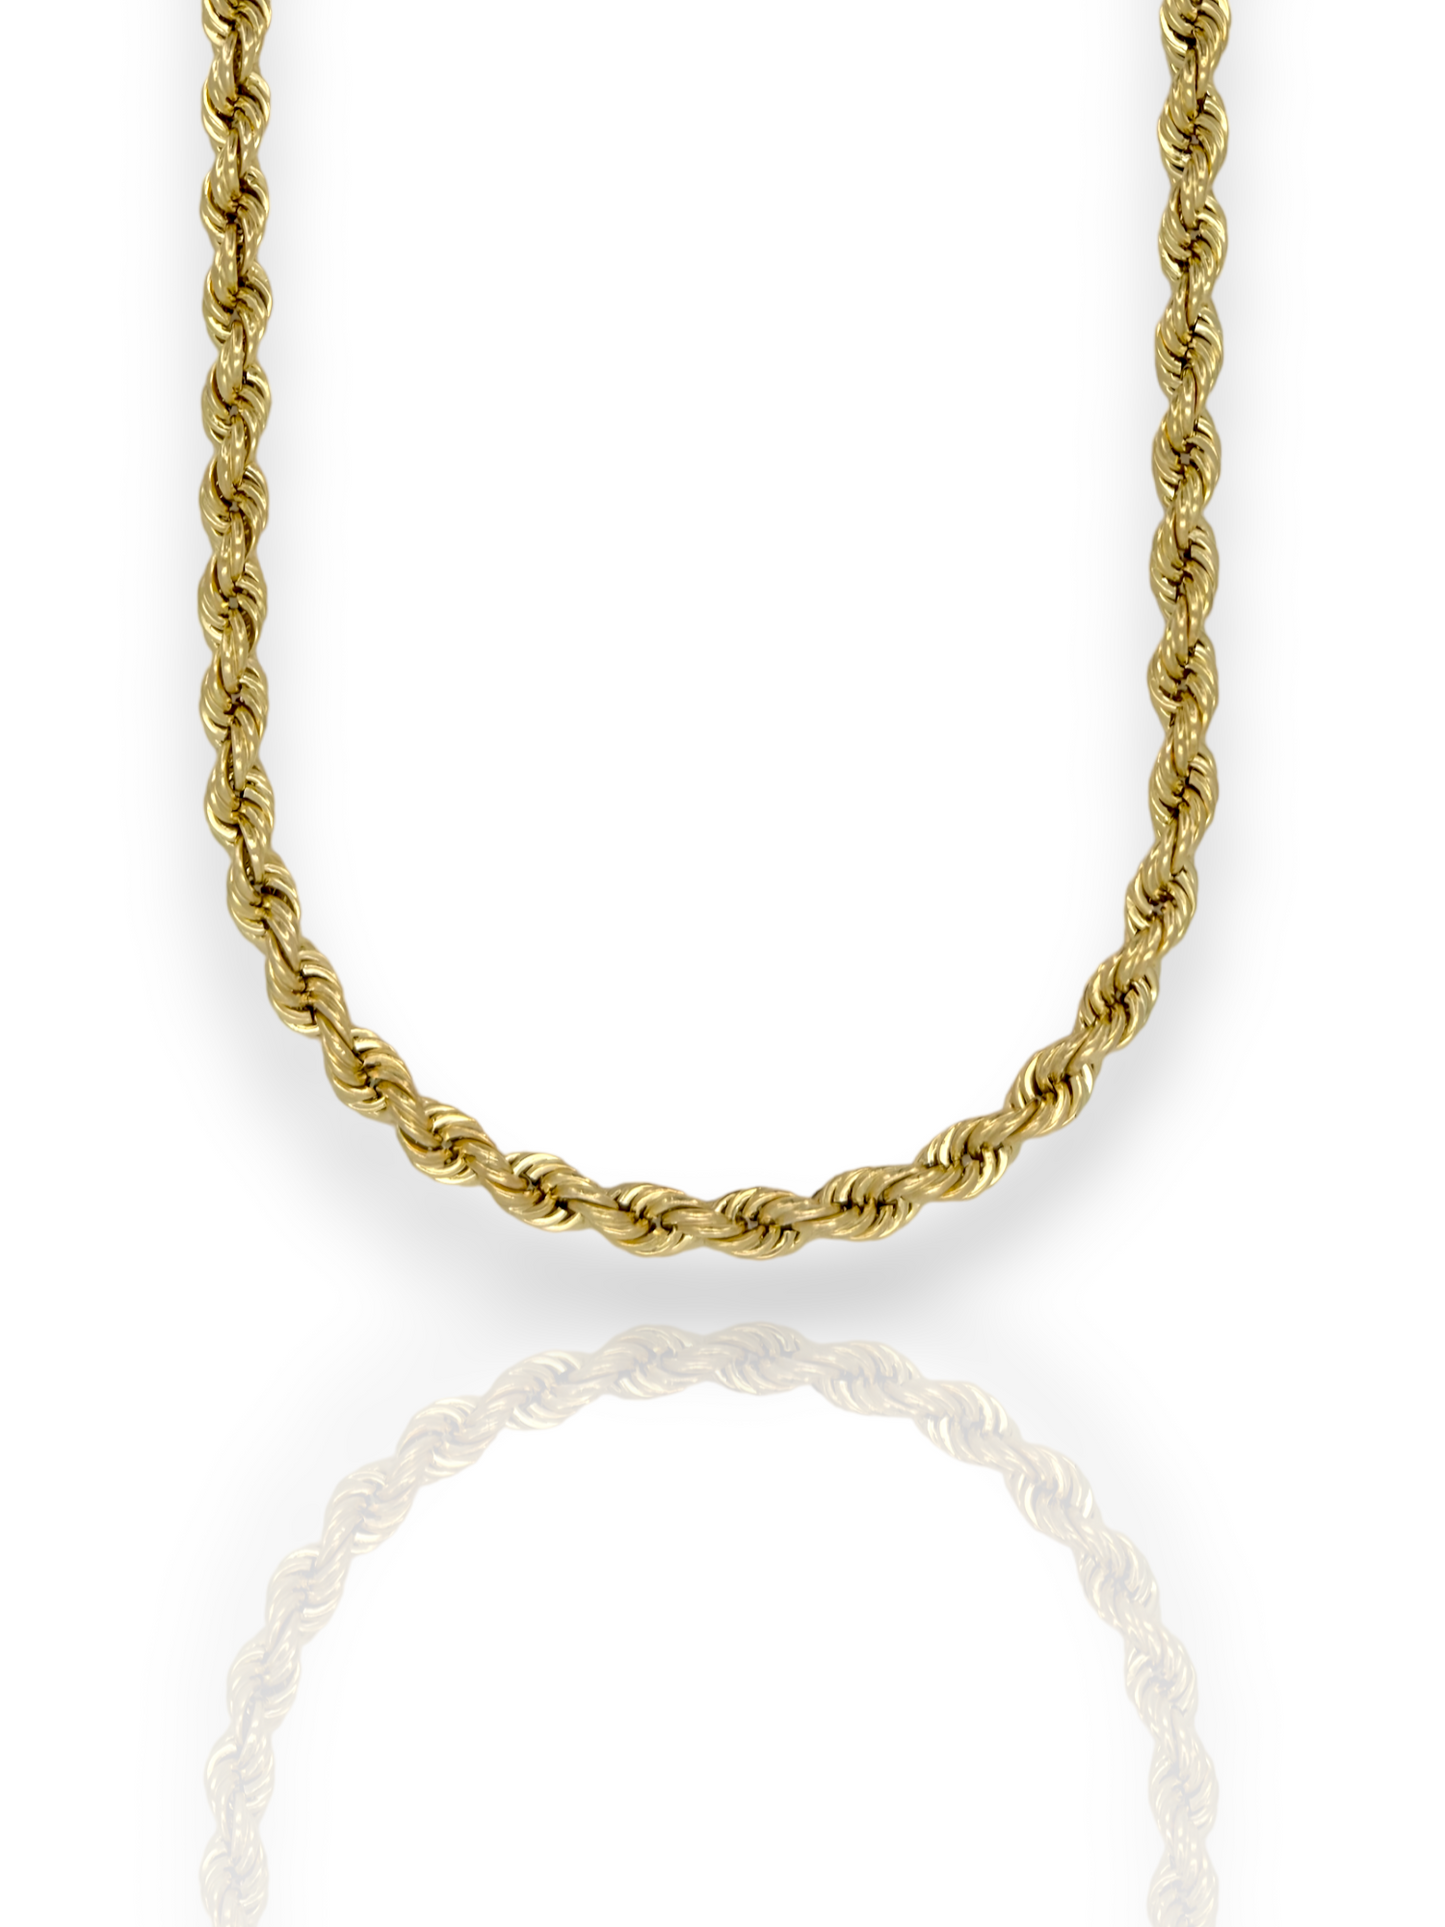 Rope Chain Necklace - 14K Yellow Gold - Hollow